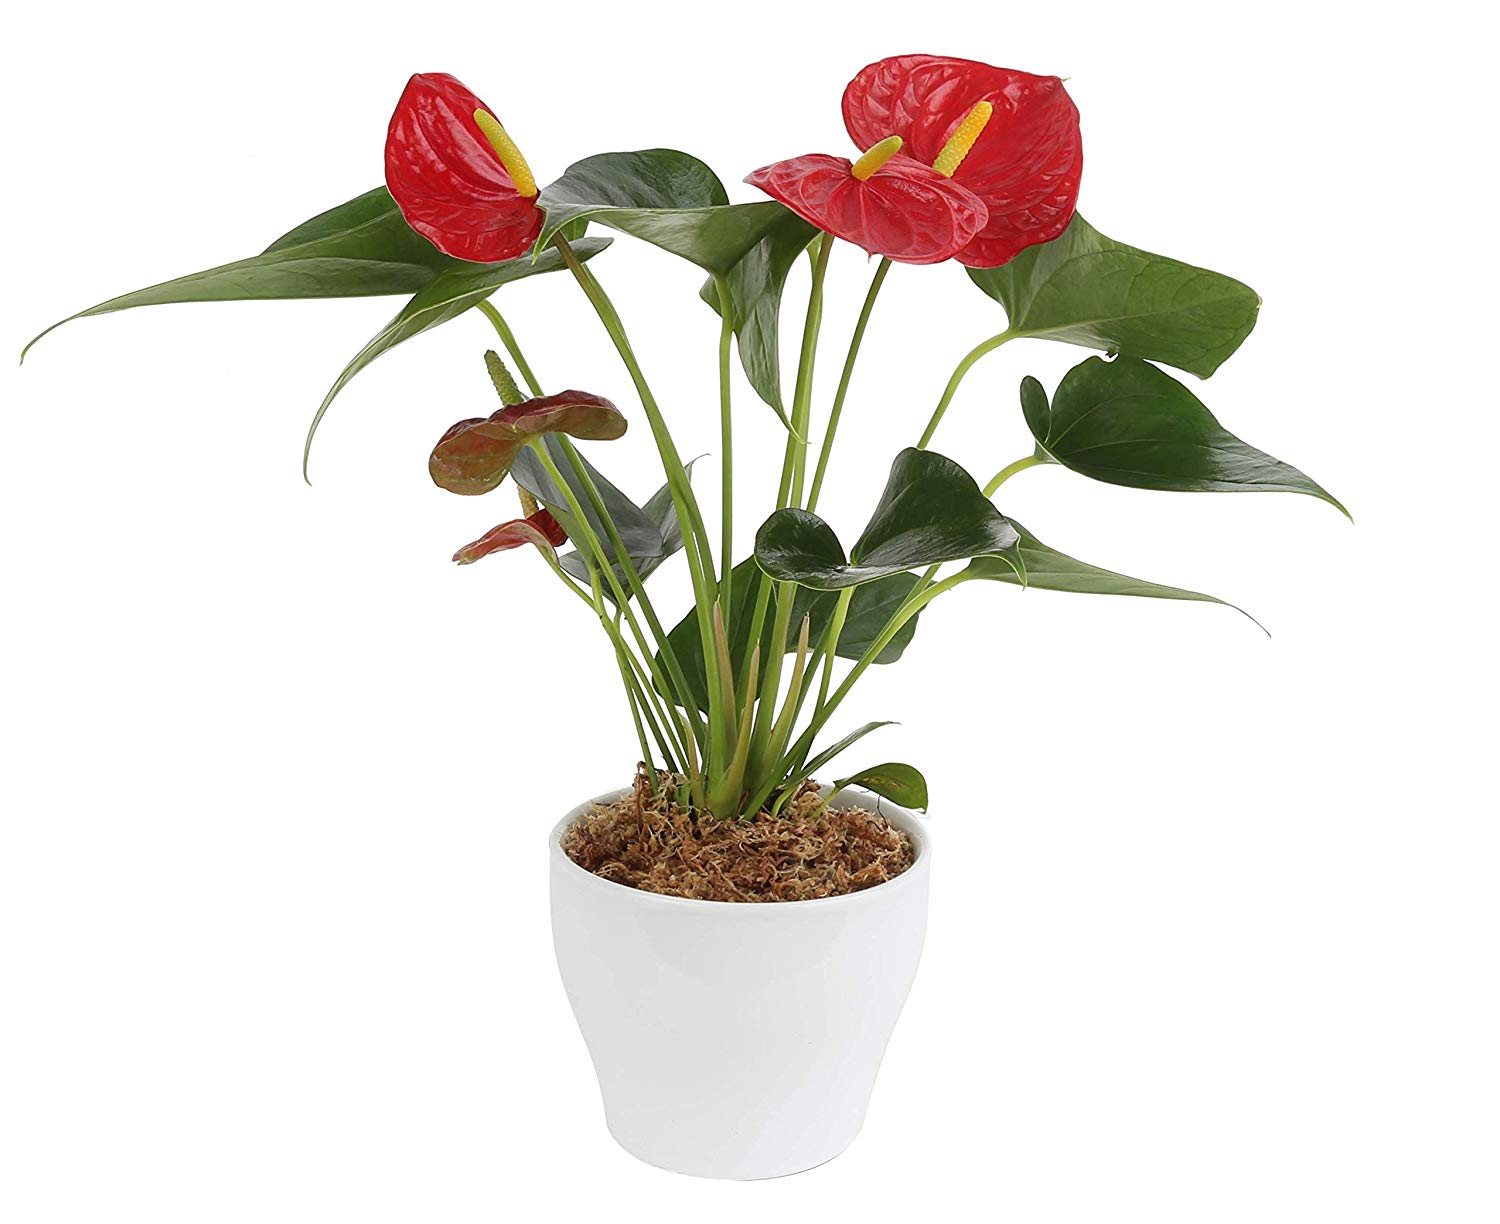 Red Anthurium plant انتوريوم